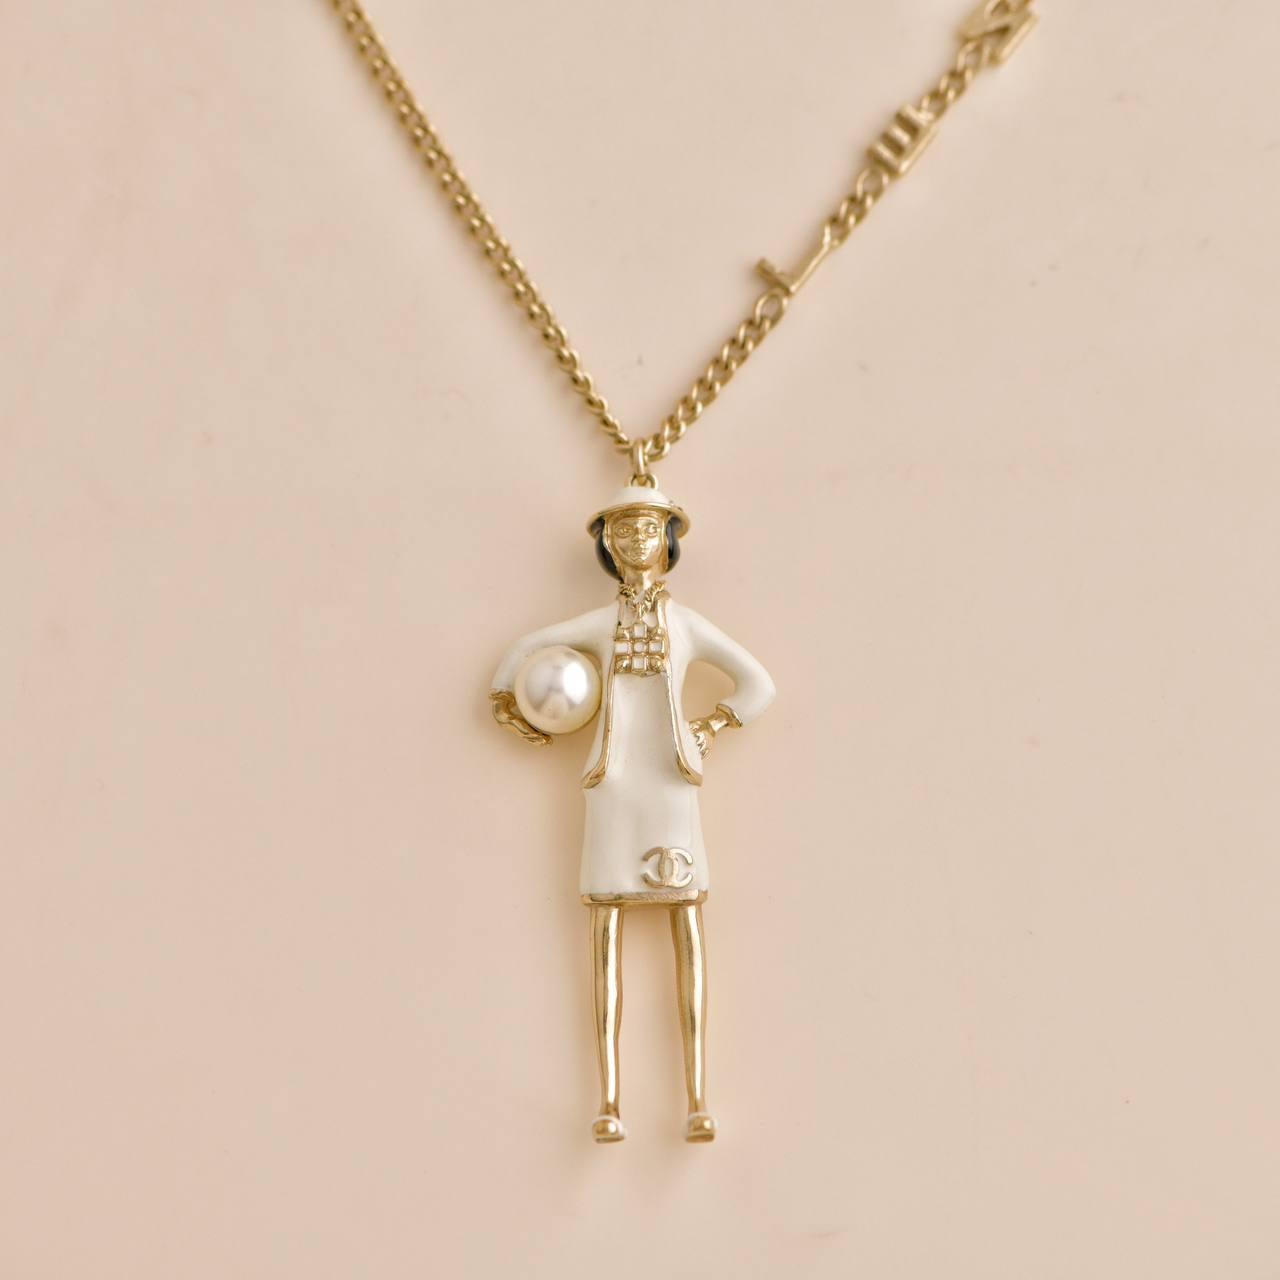 Chanel Coco Mademoiselle Figurine Enamel Gold Tone Necklace In Excellent Condition For Sale In Banbury, GB